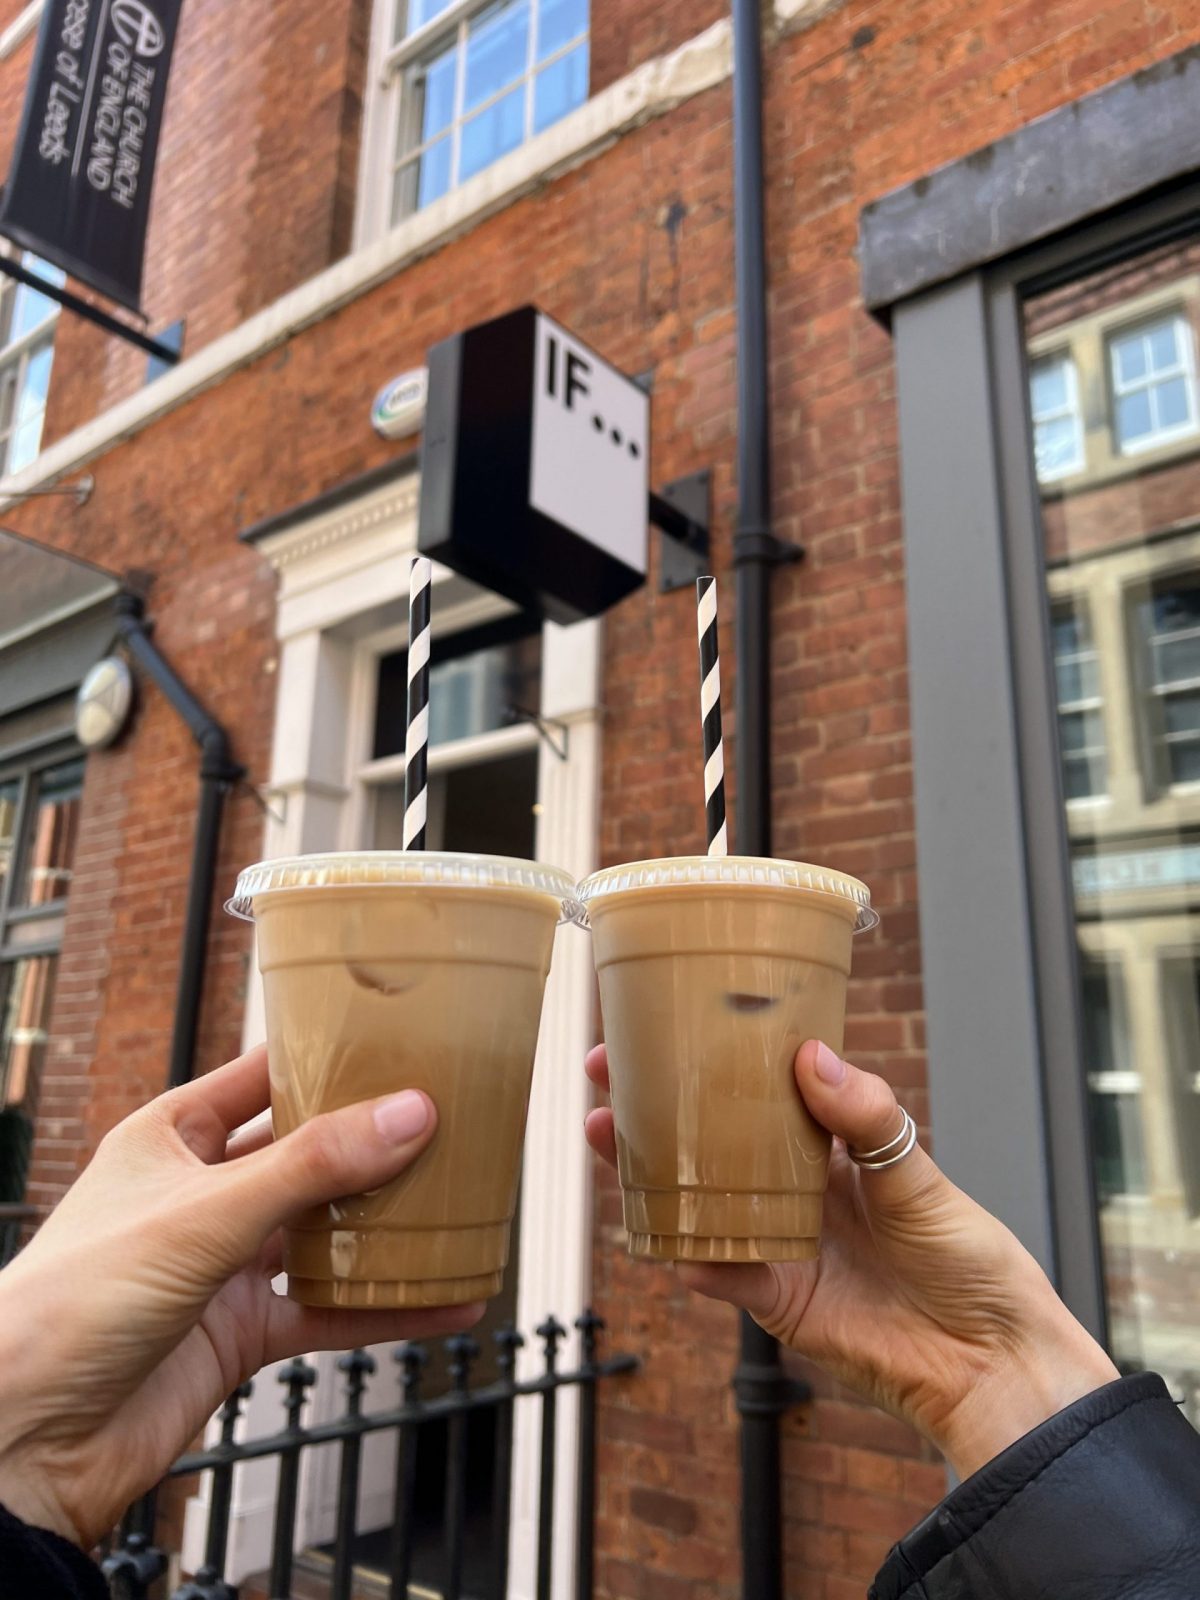 two iced lattes held up outside an IF... sign.